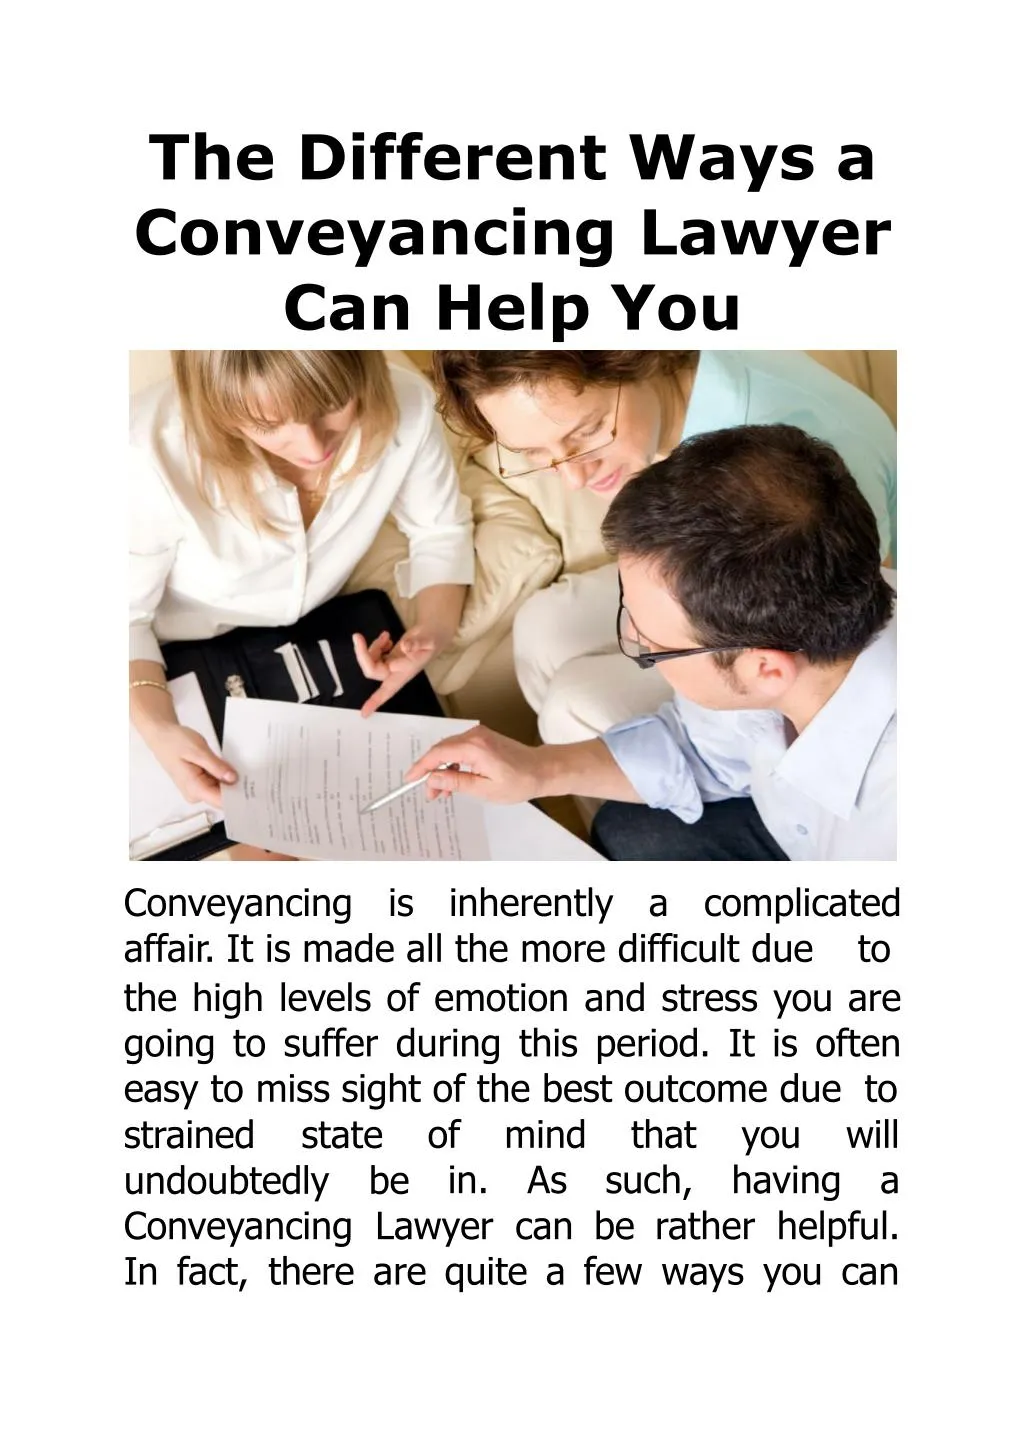 the different ways a conveyanci n g law y er can help you